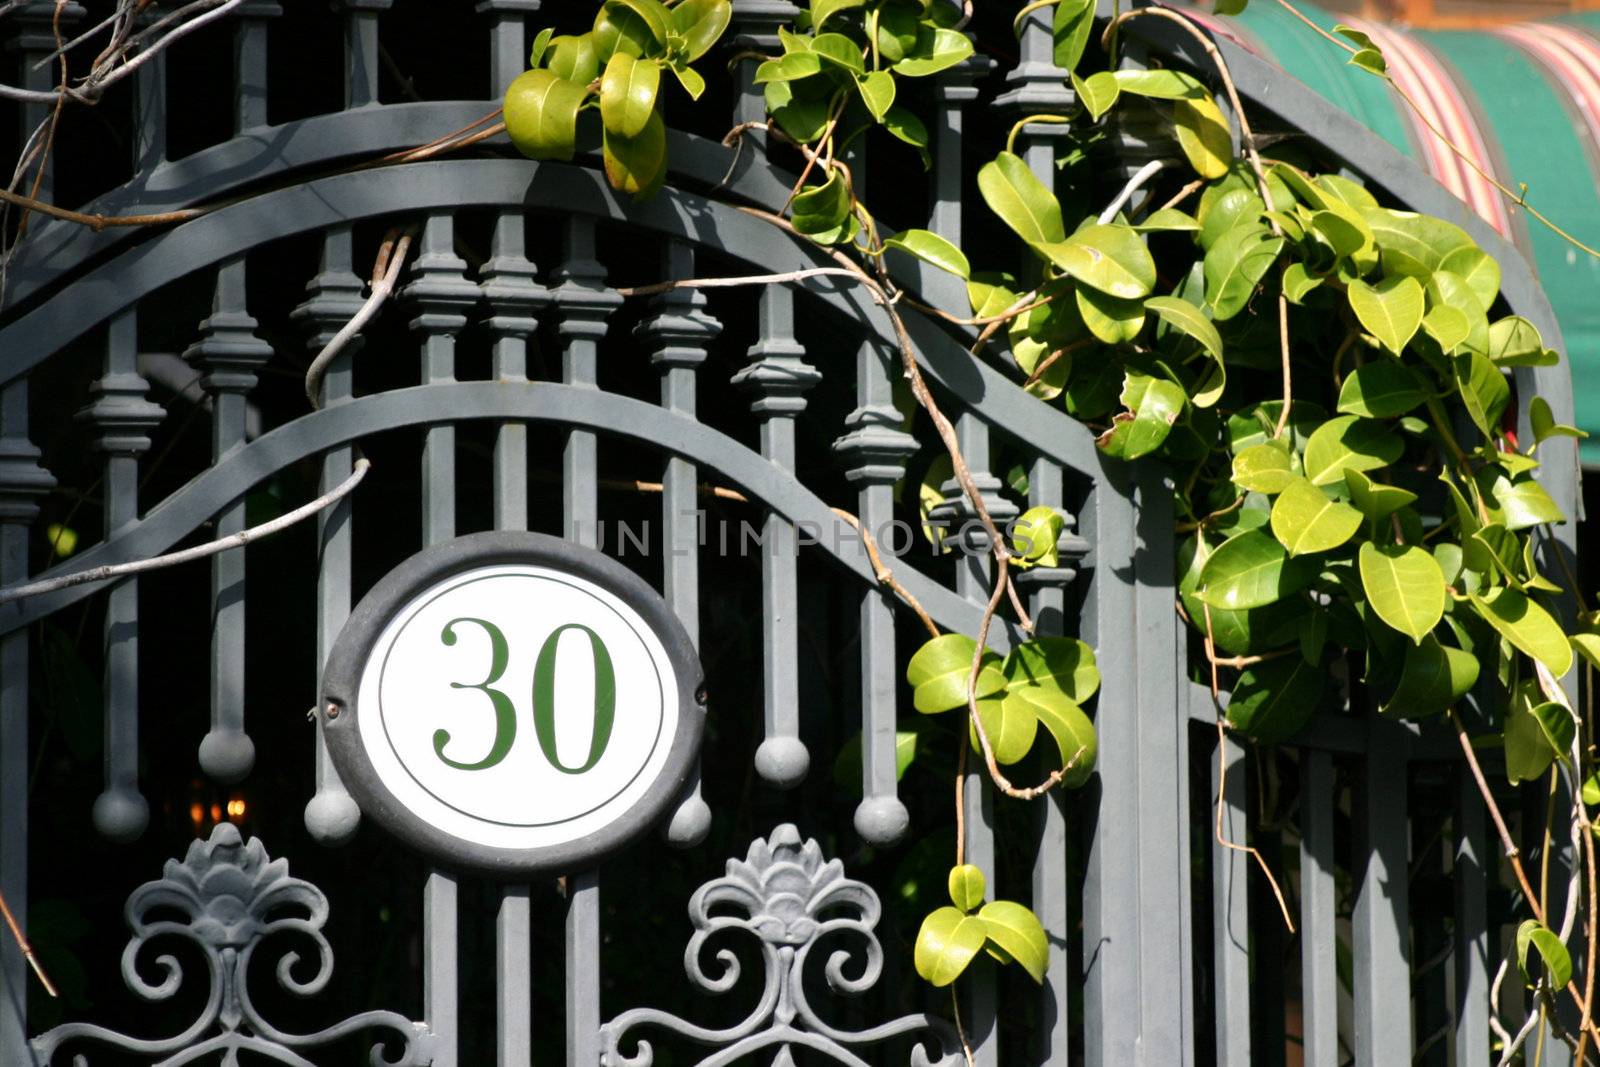 Iron door with the number 30 and some green